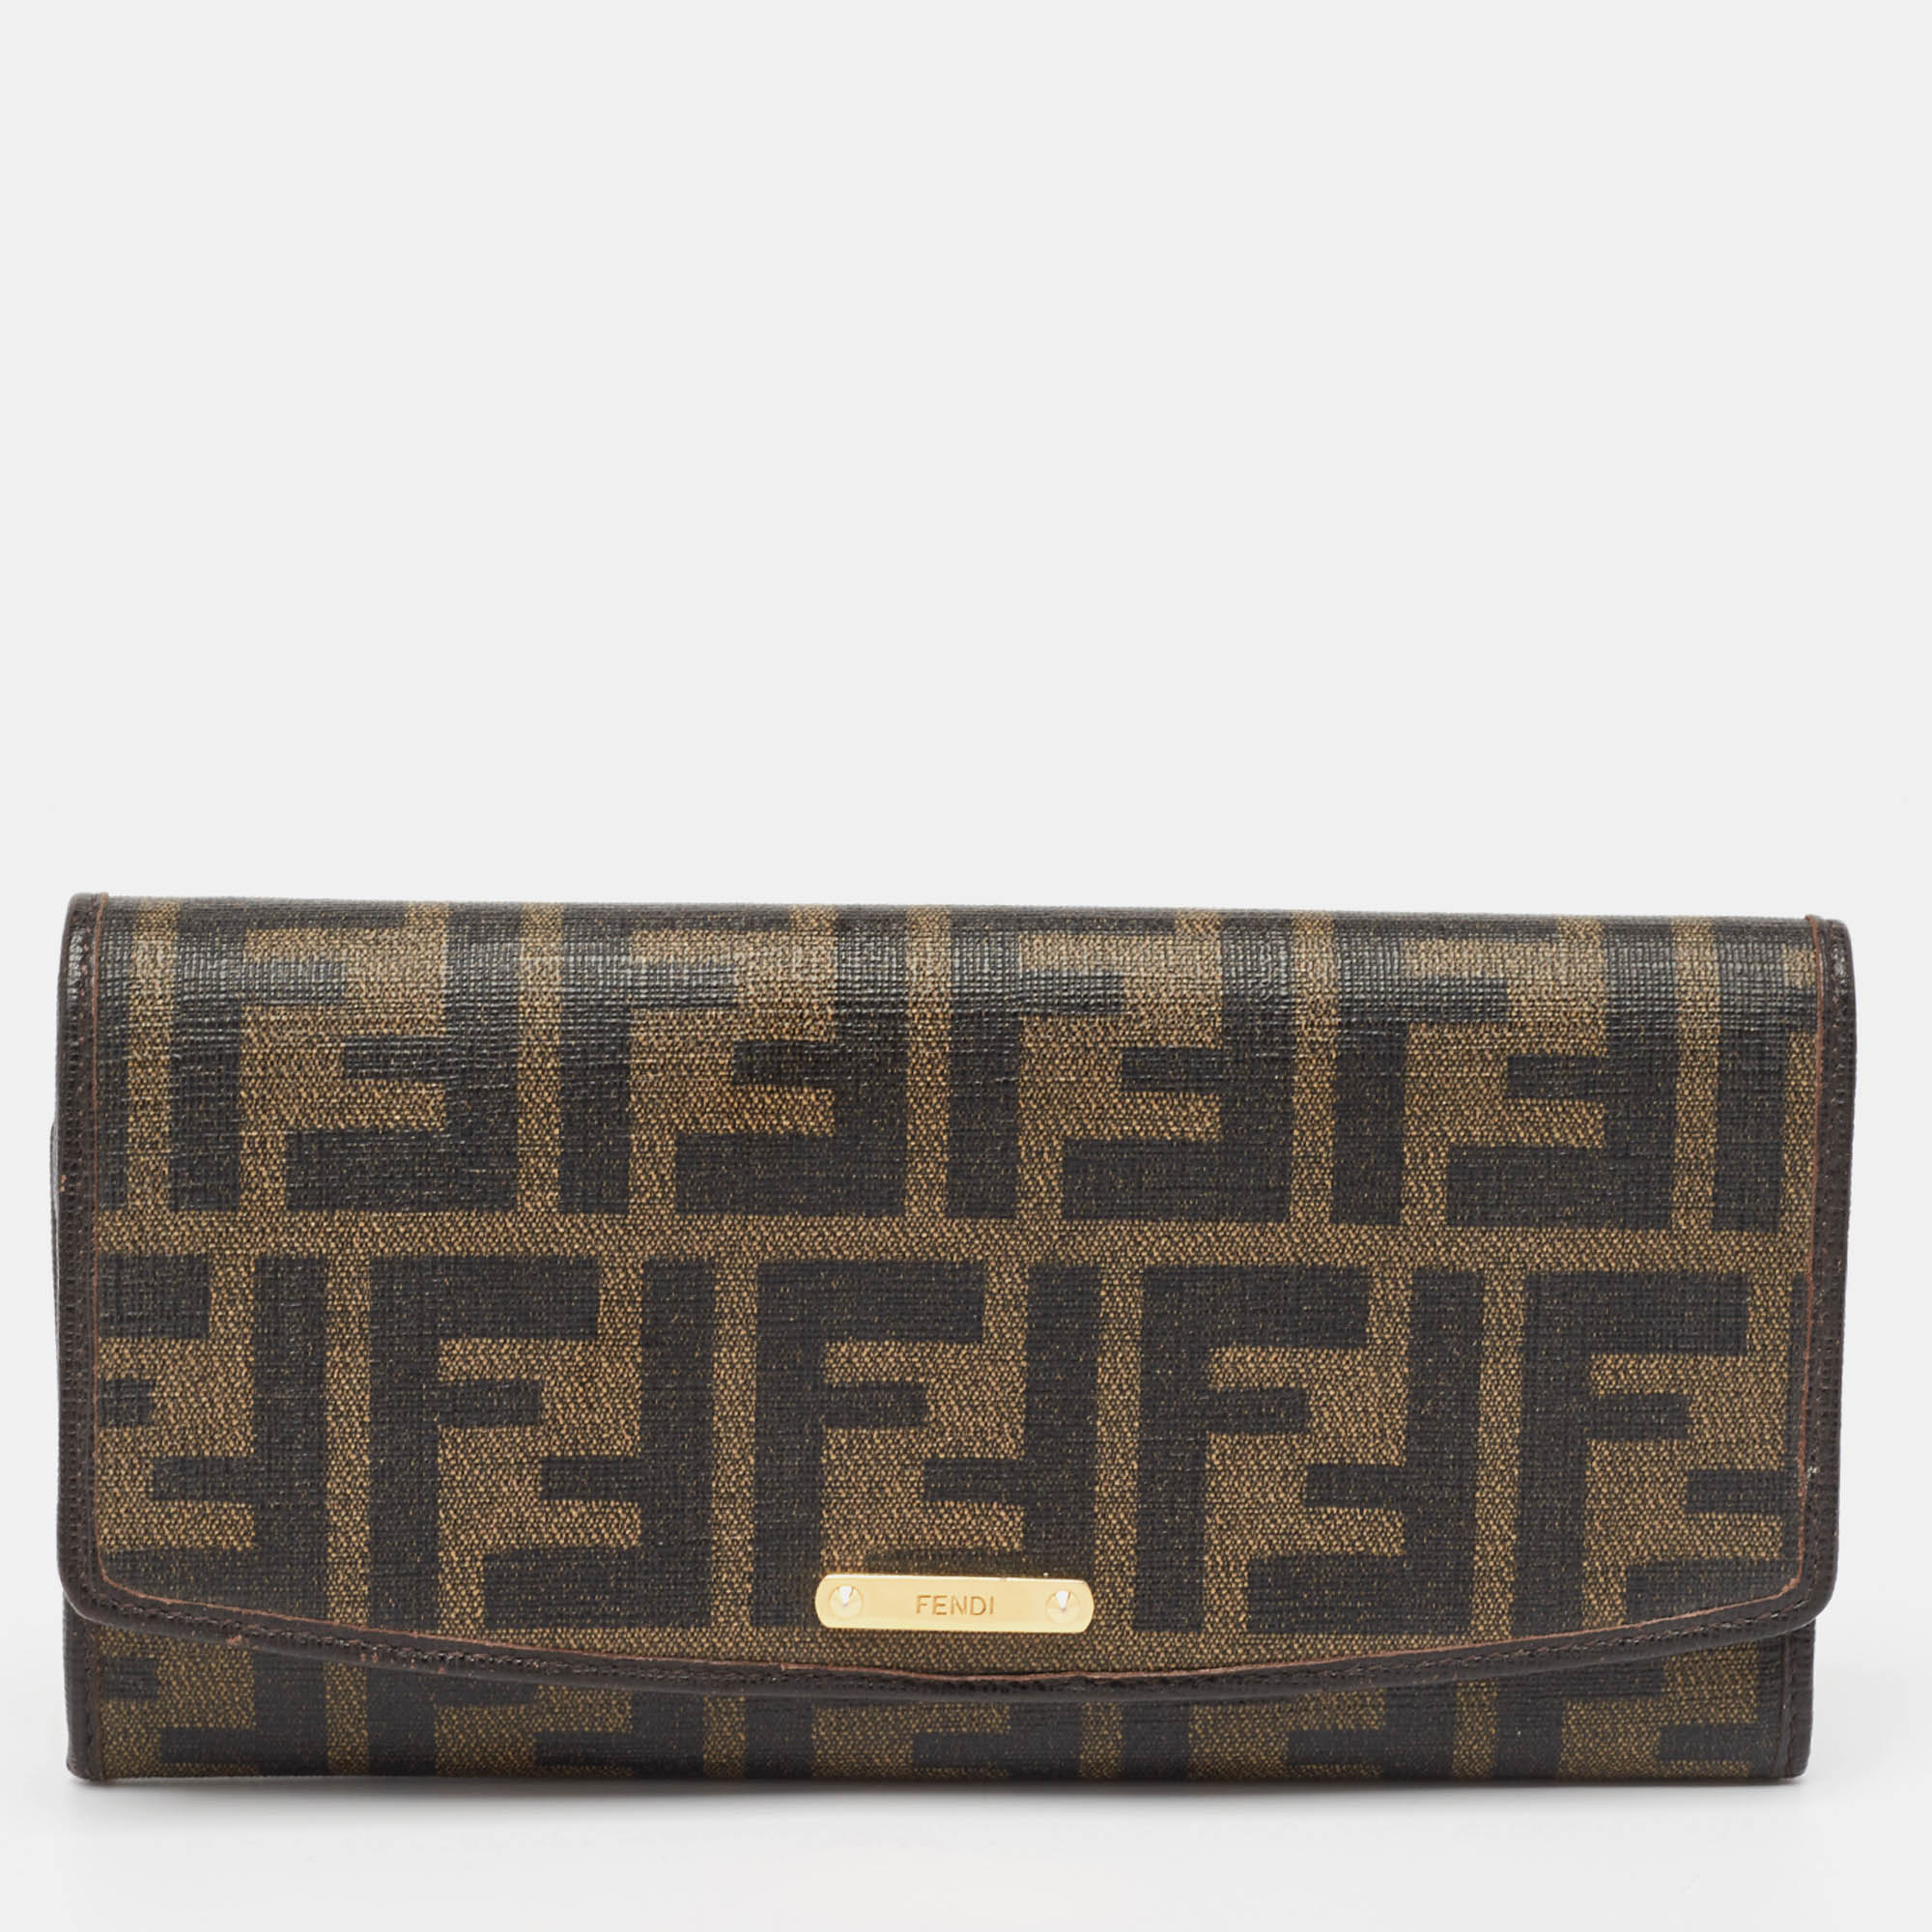 Fendi brown zucca coated canvas flap continental wallet